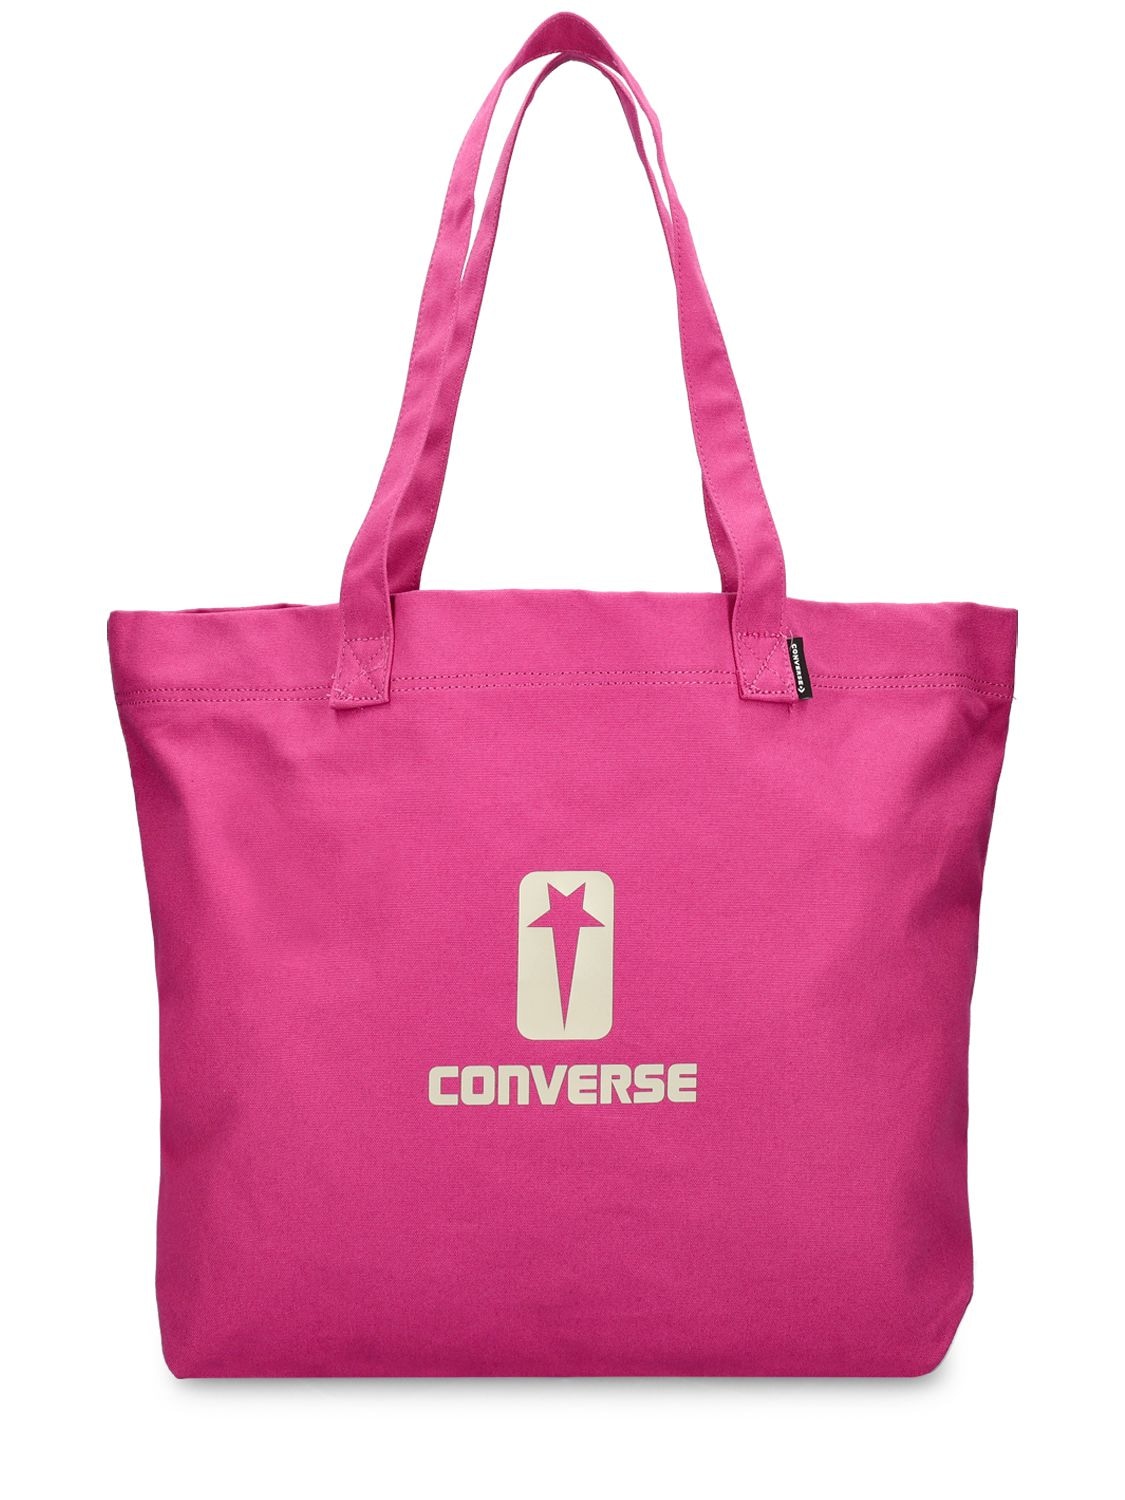 Drkshdw X Converse Converse Logo Tote Bag In Hot Pink